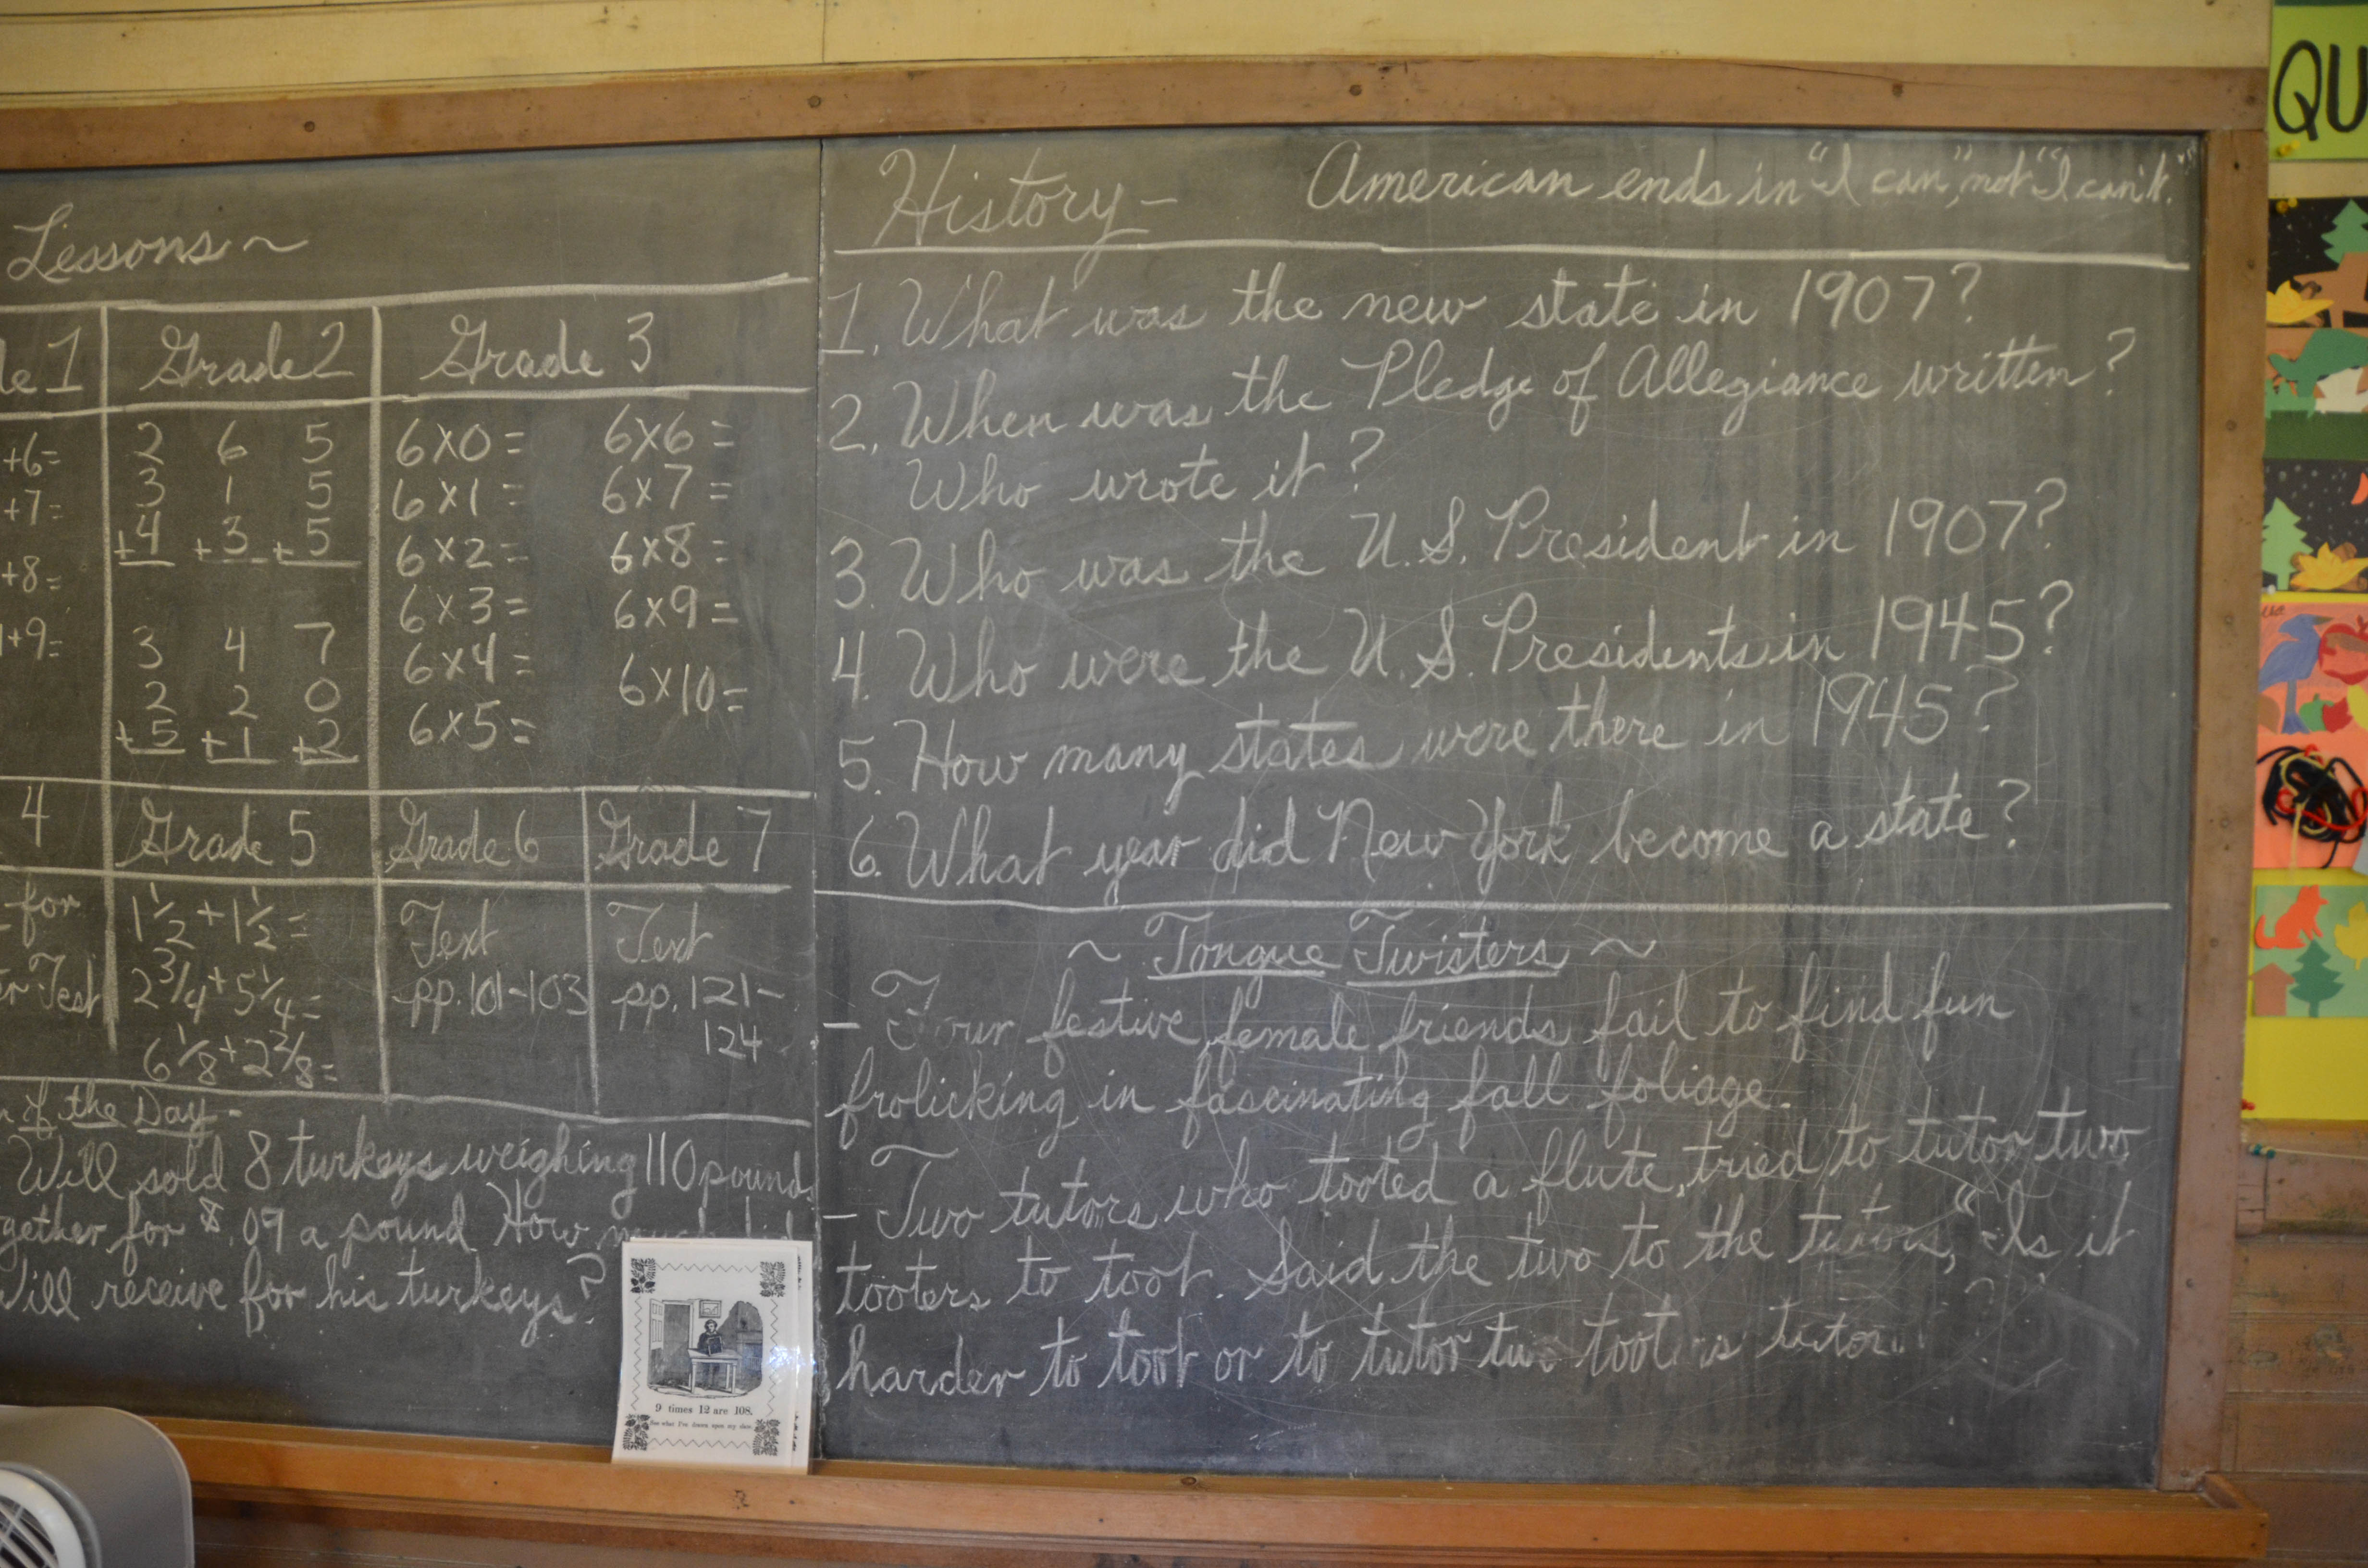 Kids these days don't remember blackboards.